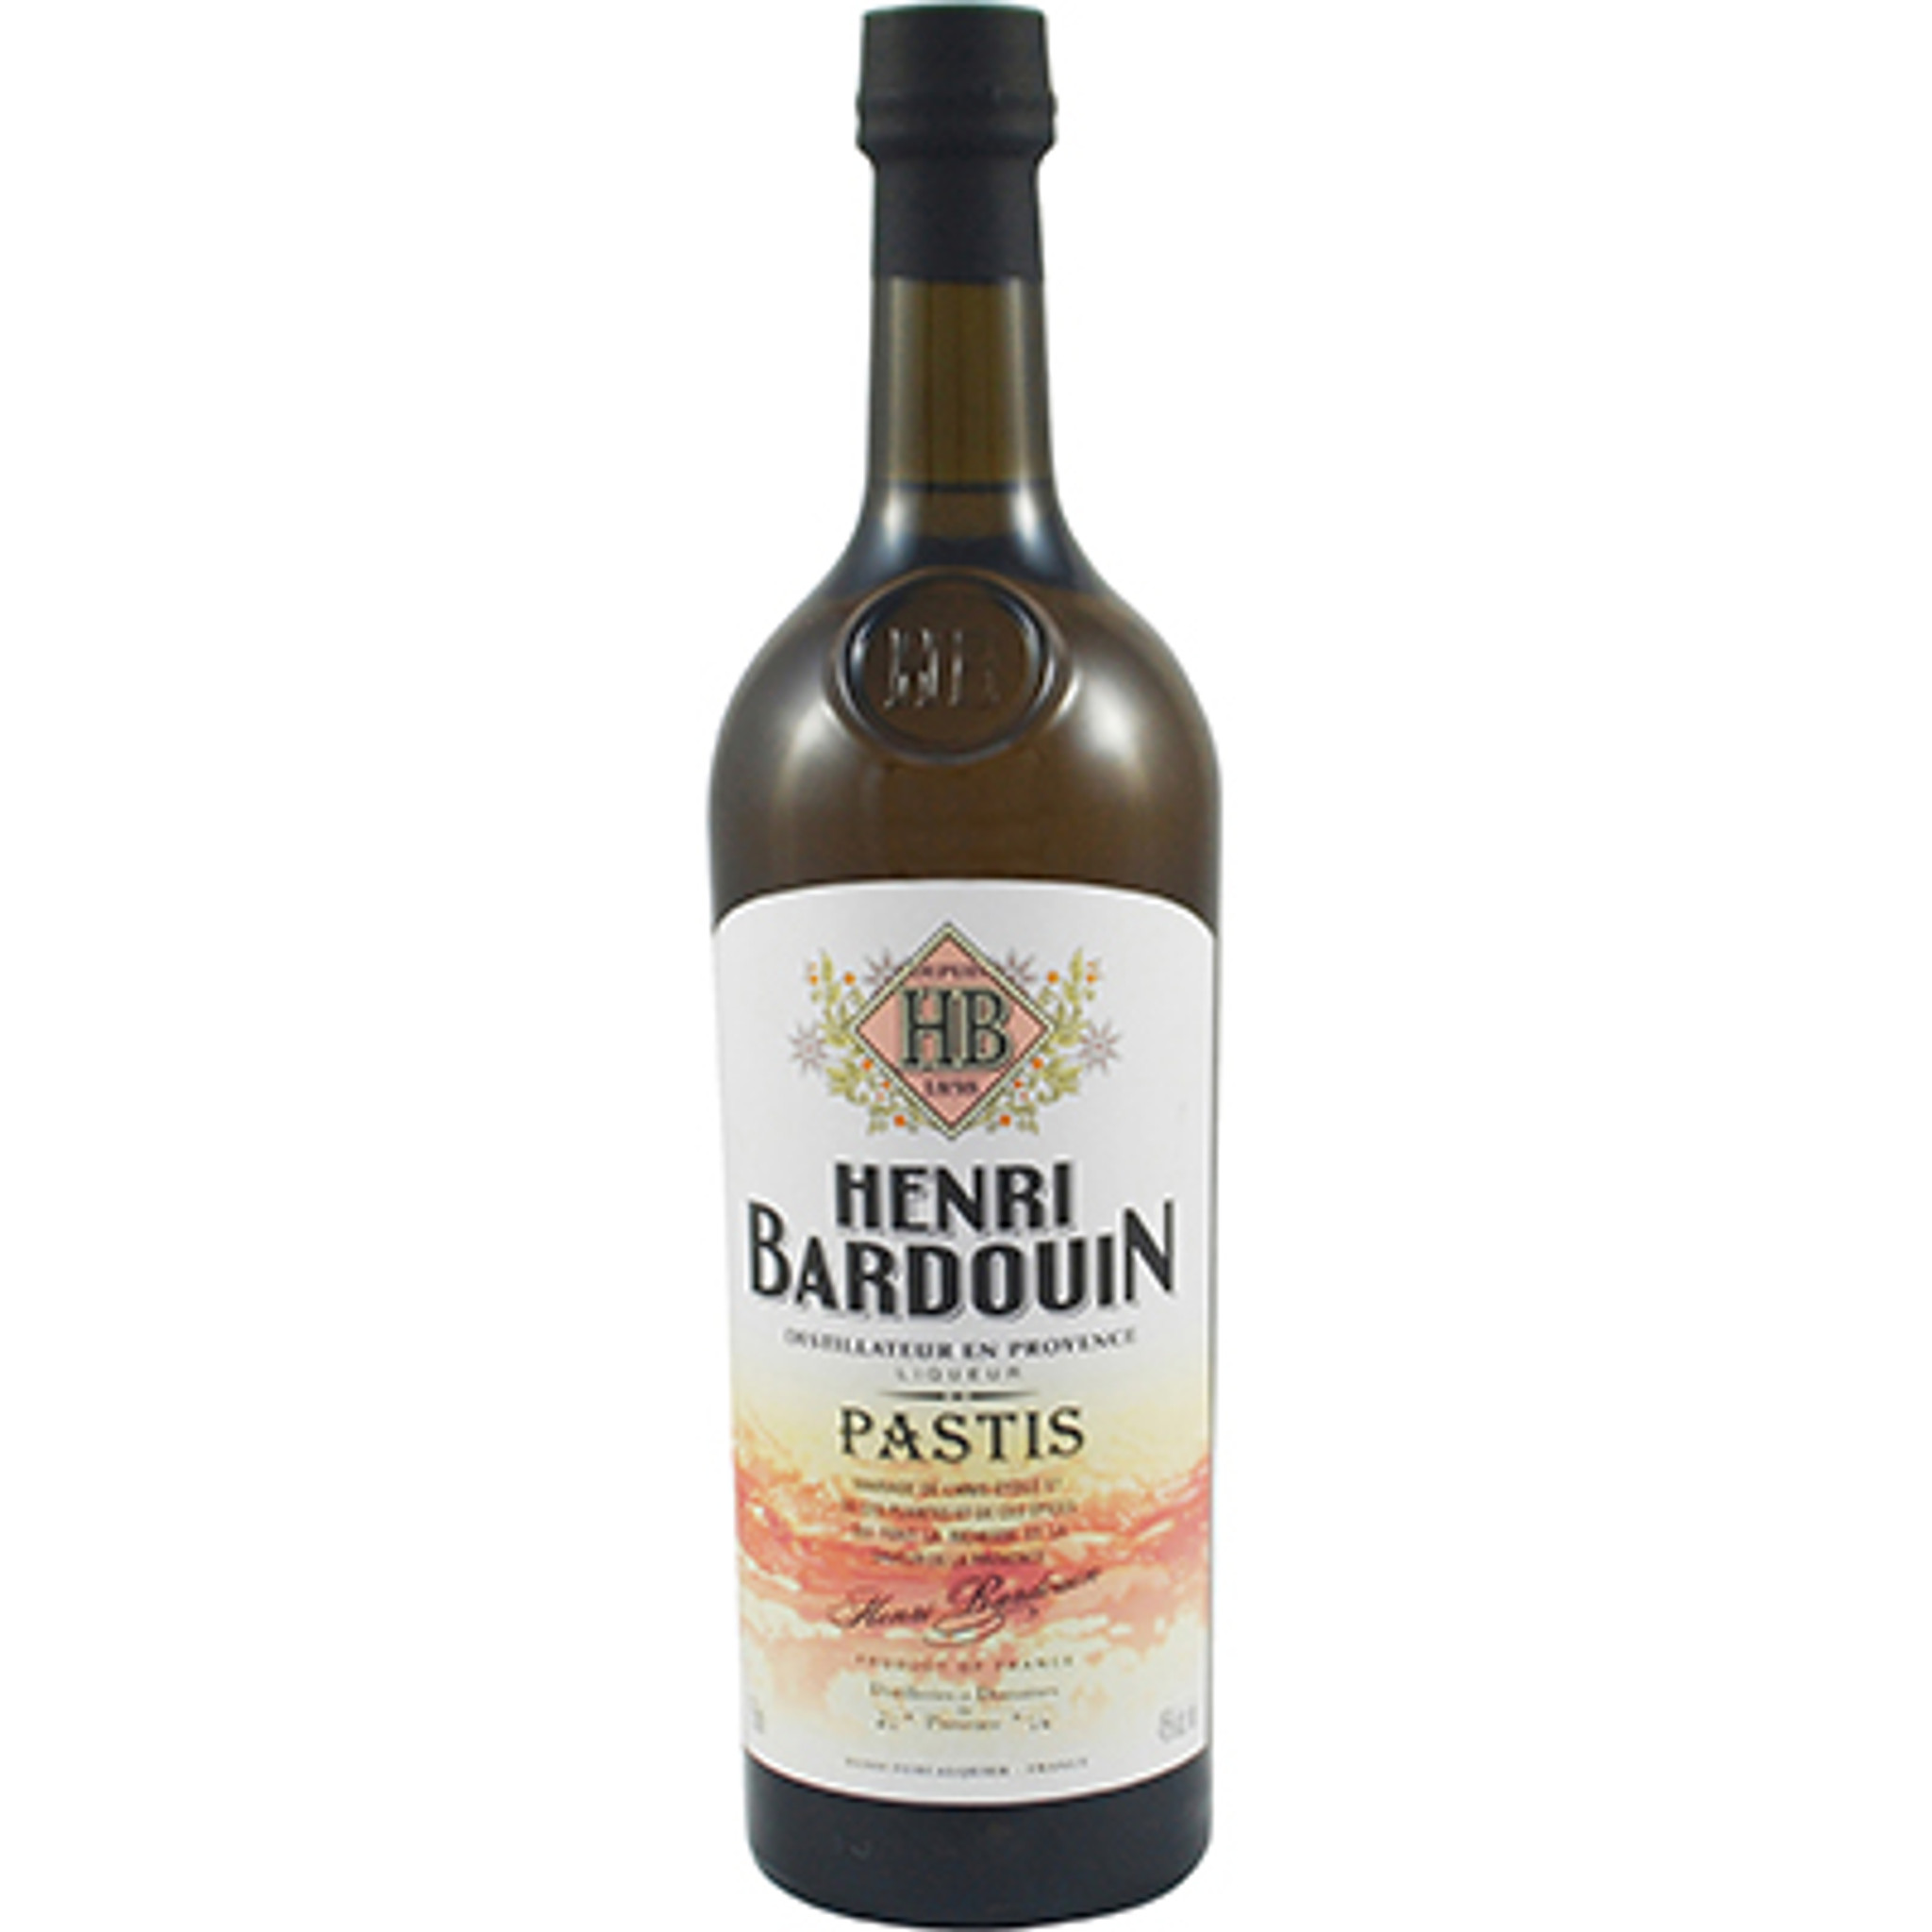 French pastis Henri Bardouin : Traditional Grand Cru Pastis with herbs and  spices - Distilleries et domaines de Provence